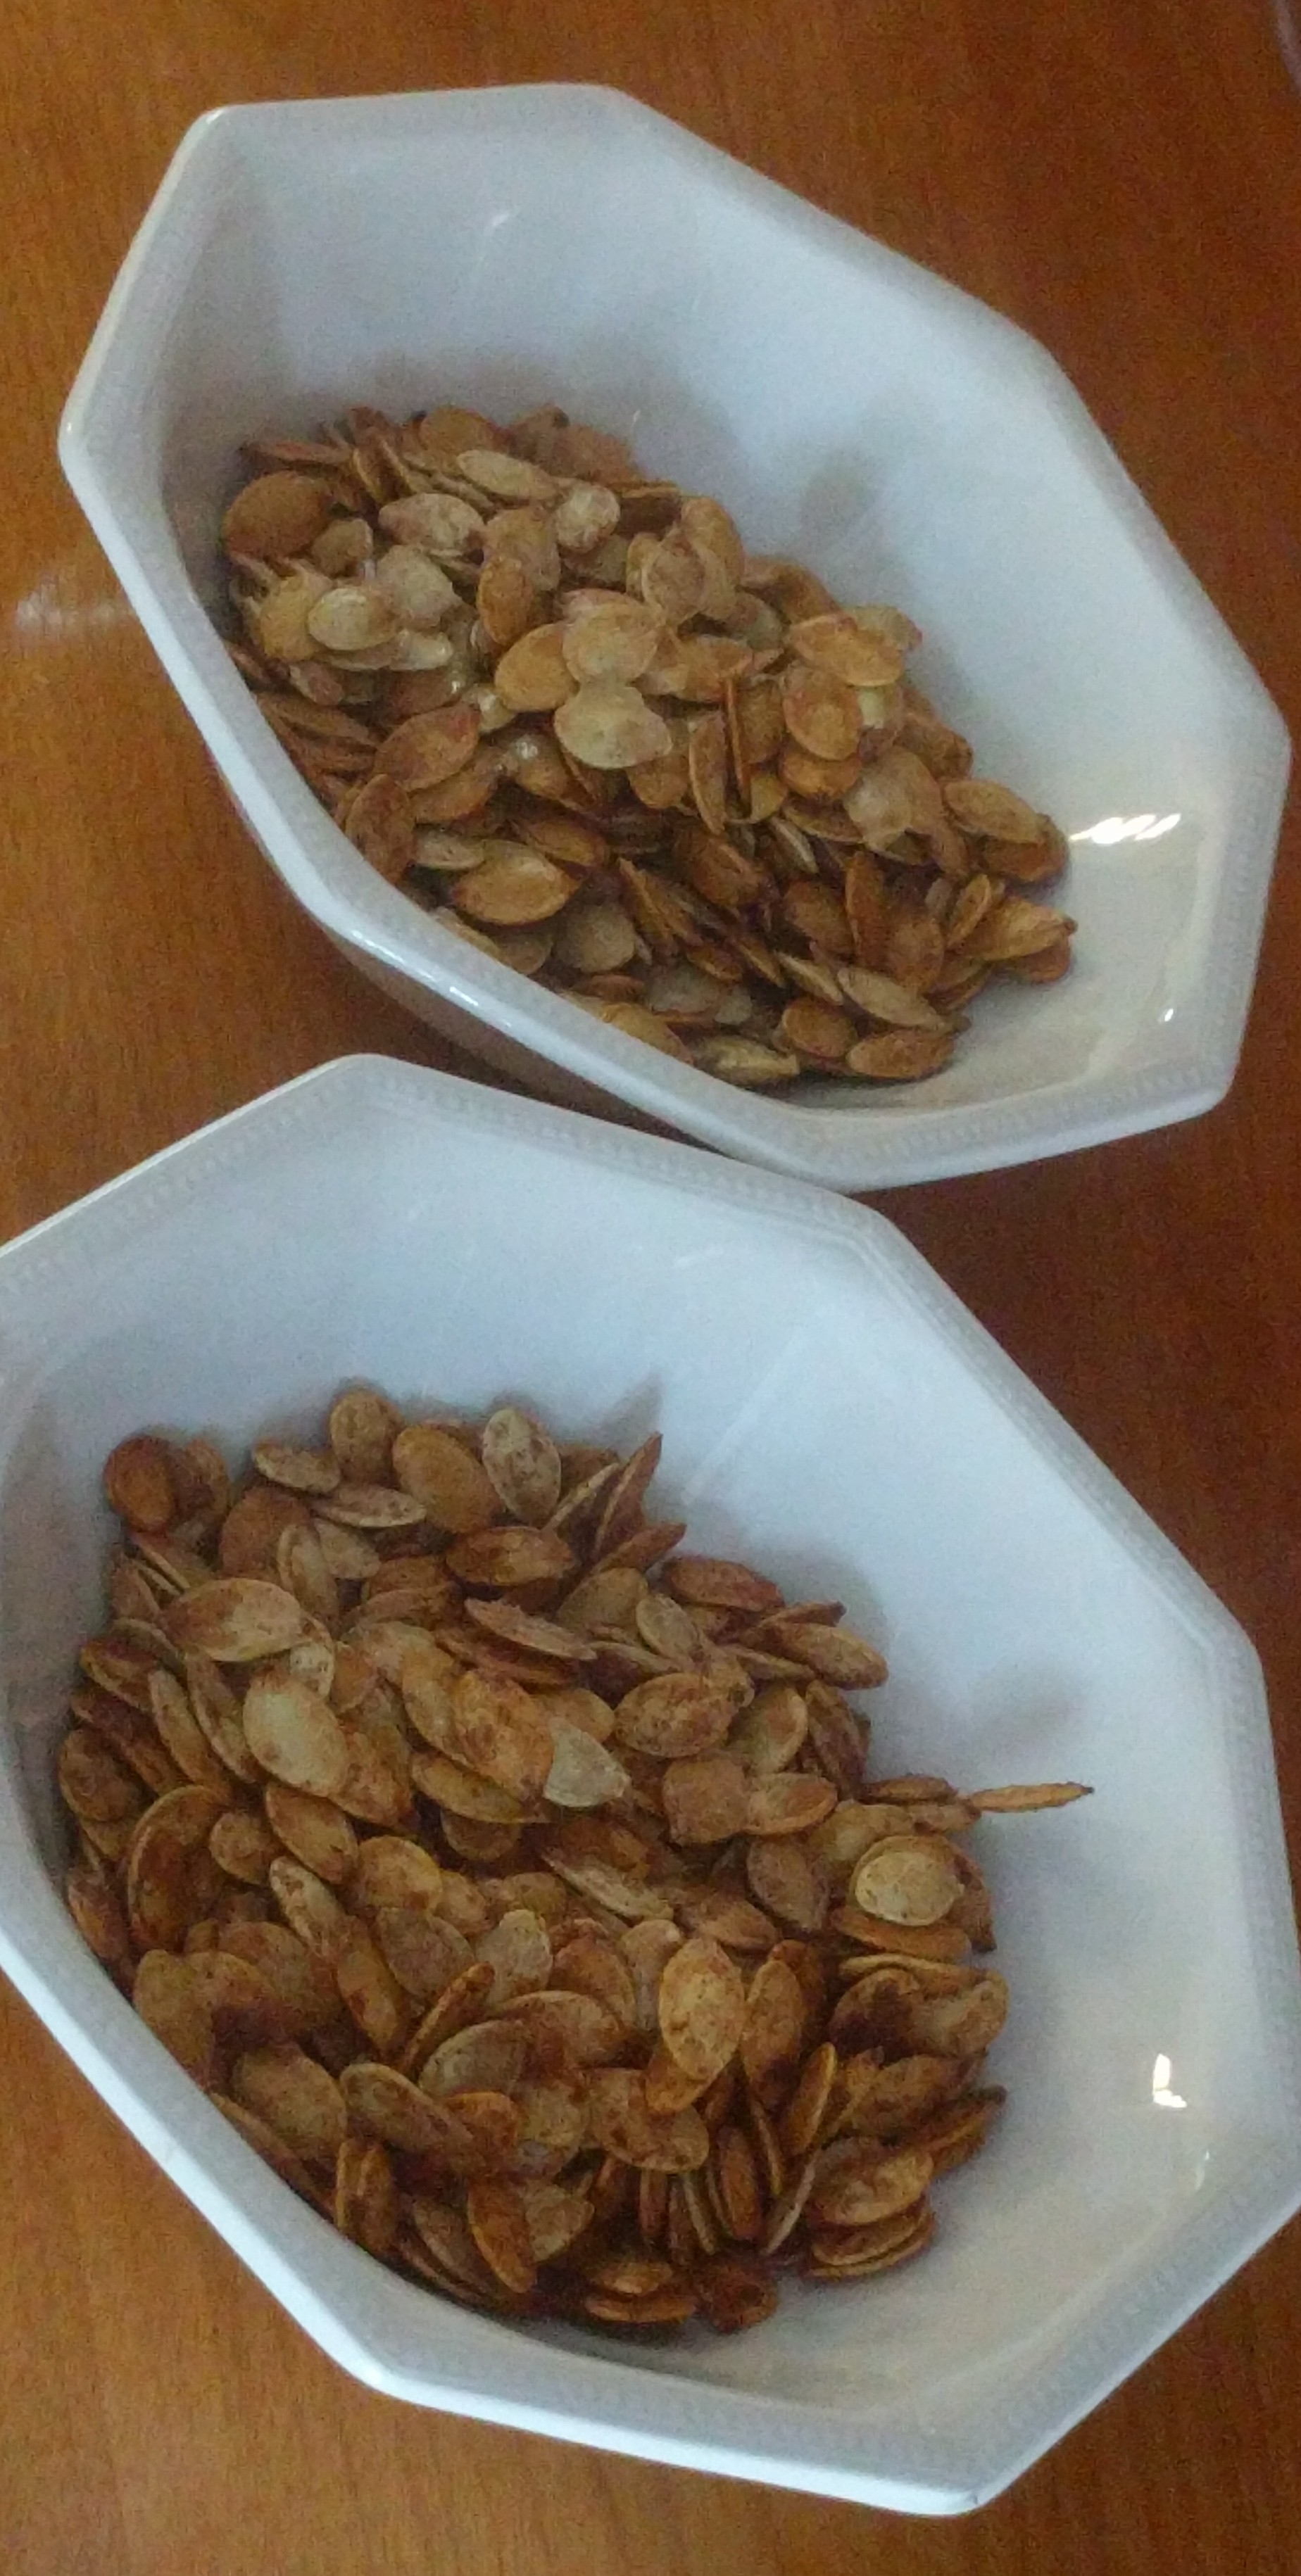 How To Make Pumpkin at Home for All Your Fall Favorites (Starting with Pumpkin Seeds)